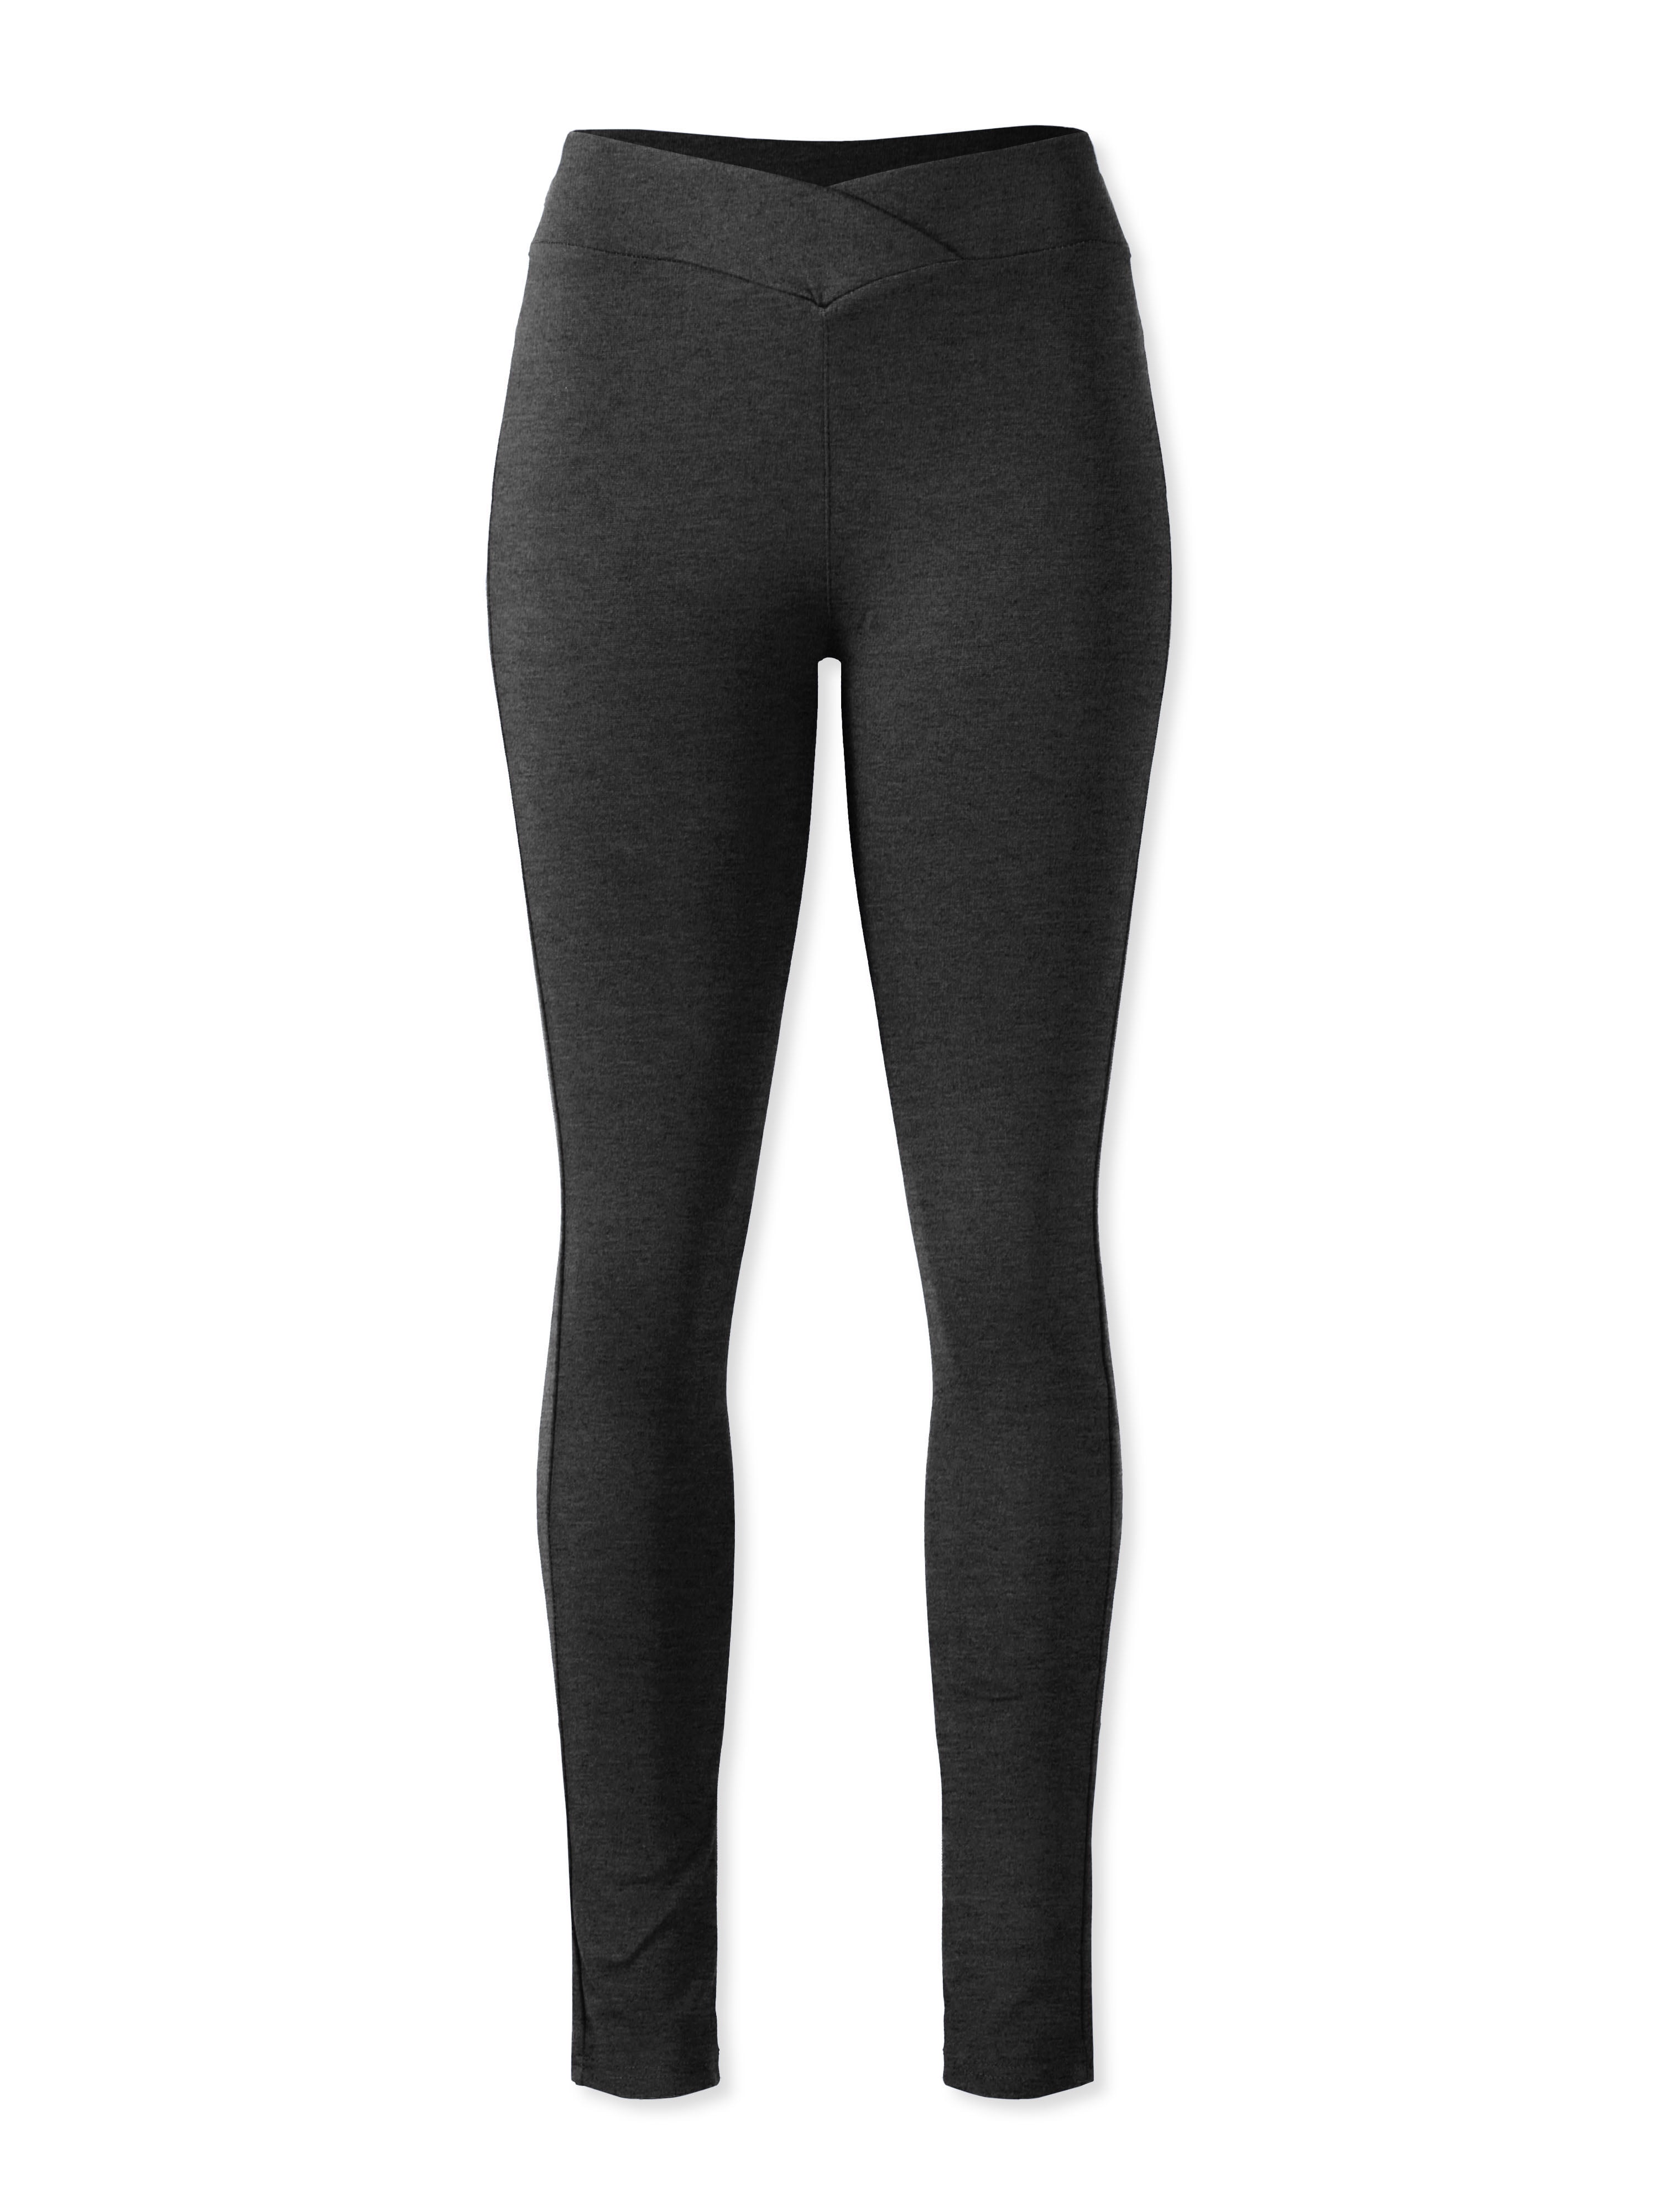 Hat and Beyond Women's Compression V Shaped Waist Squat Proof Exercise  Leggings